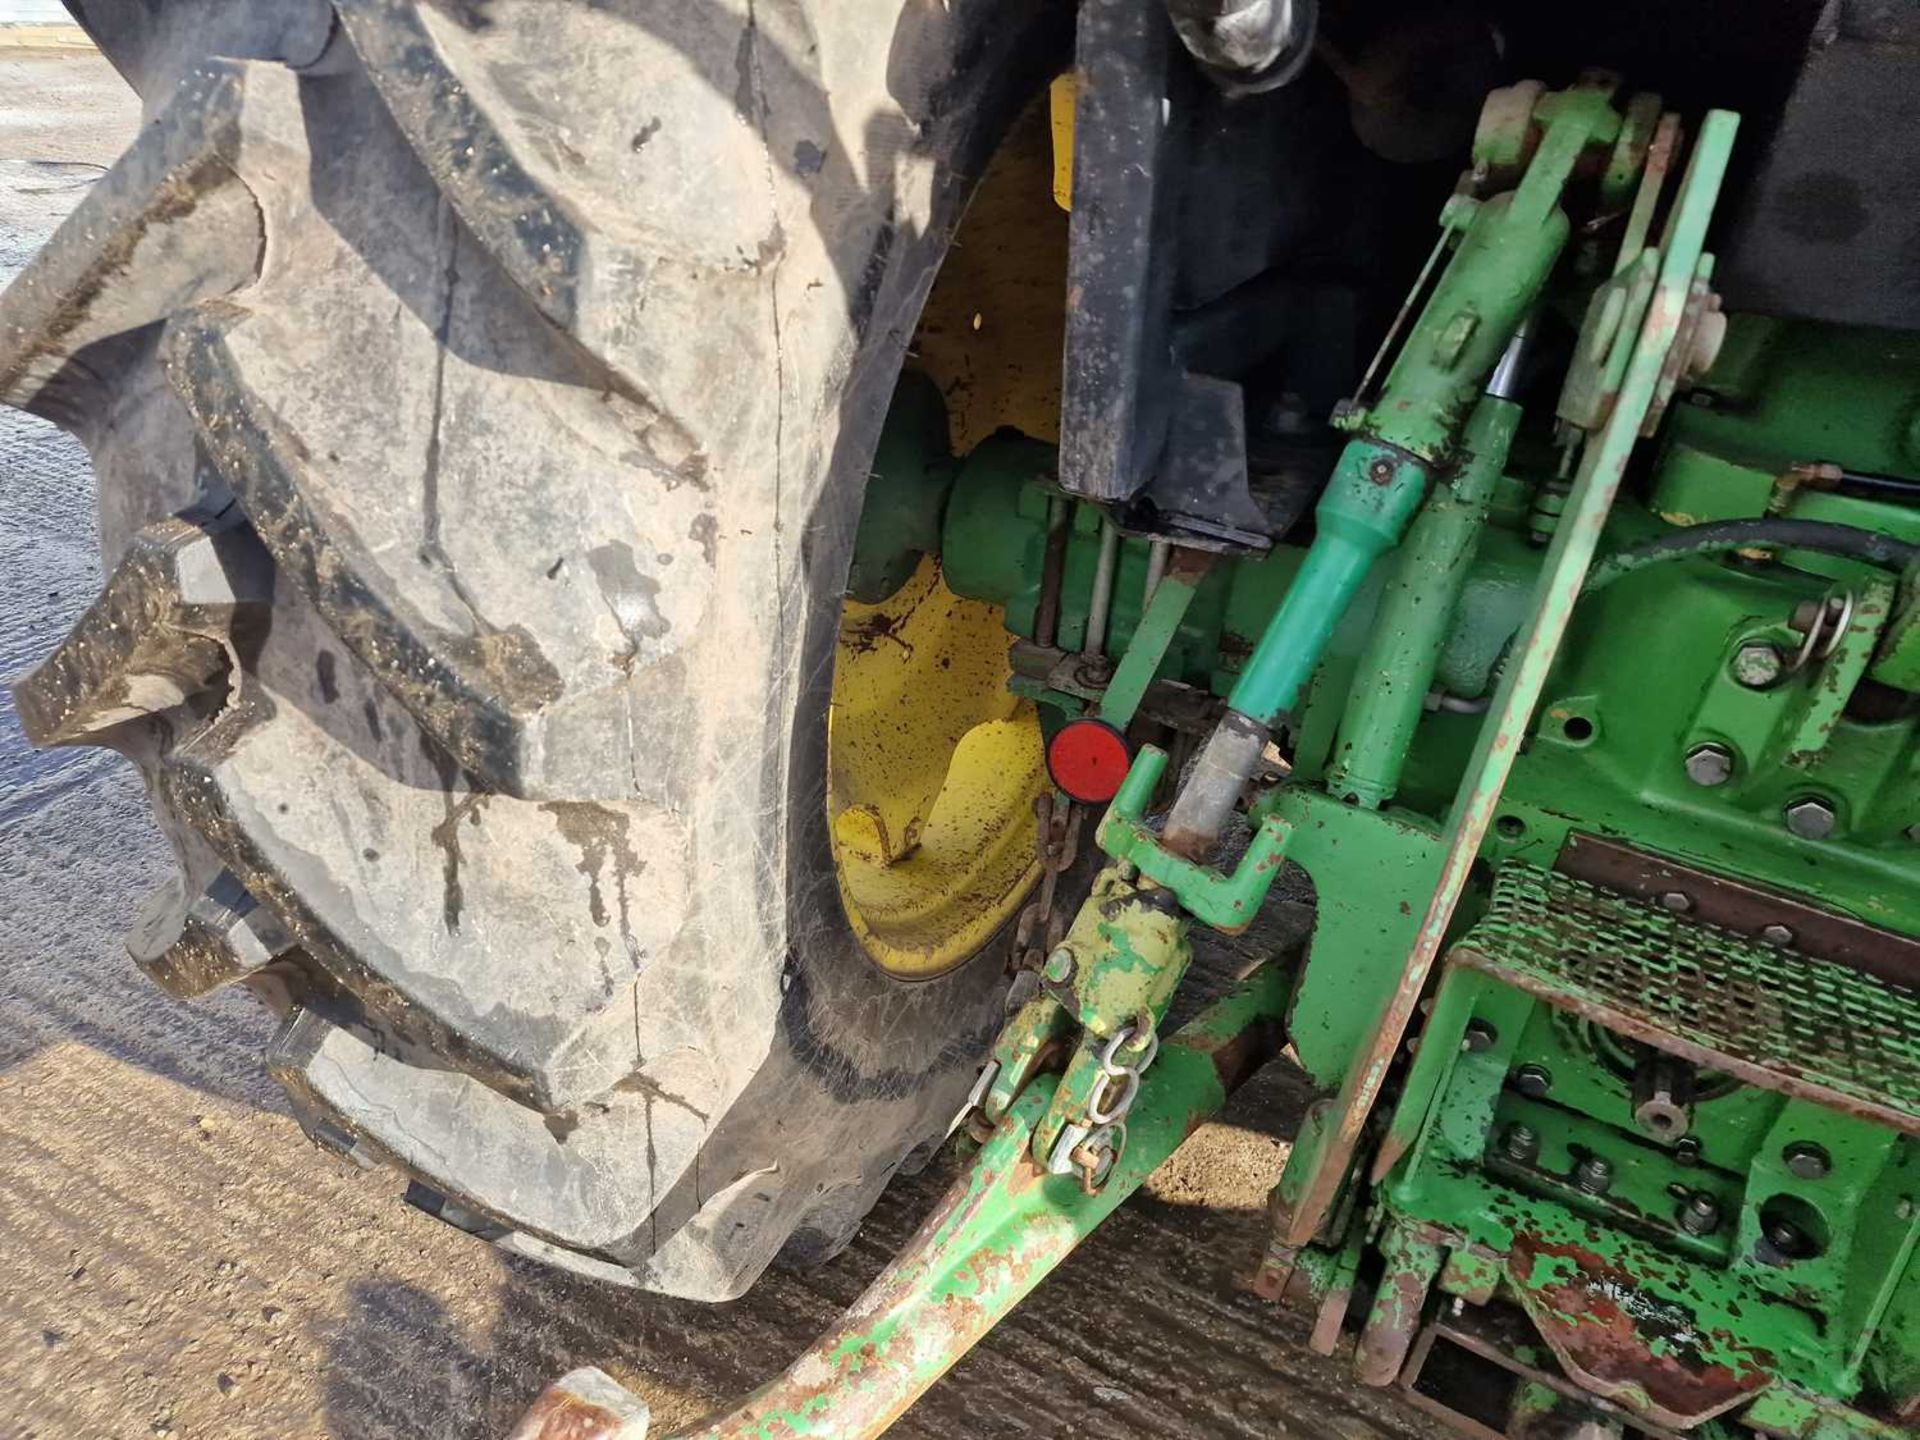 1989 John Deere 2850 4WD Tractor, Loader, 2 Spool Valves, Push Out Hitch (Reg. Docs. Available) - Image 15 of 25